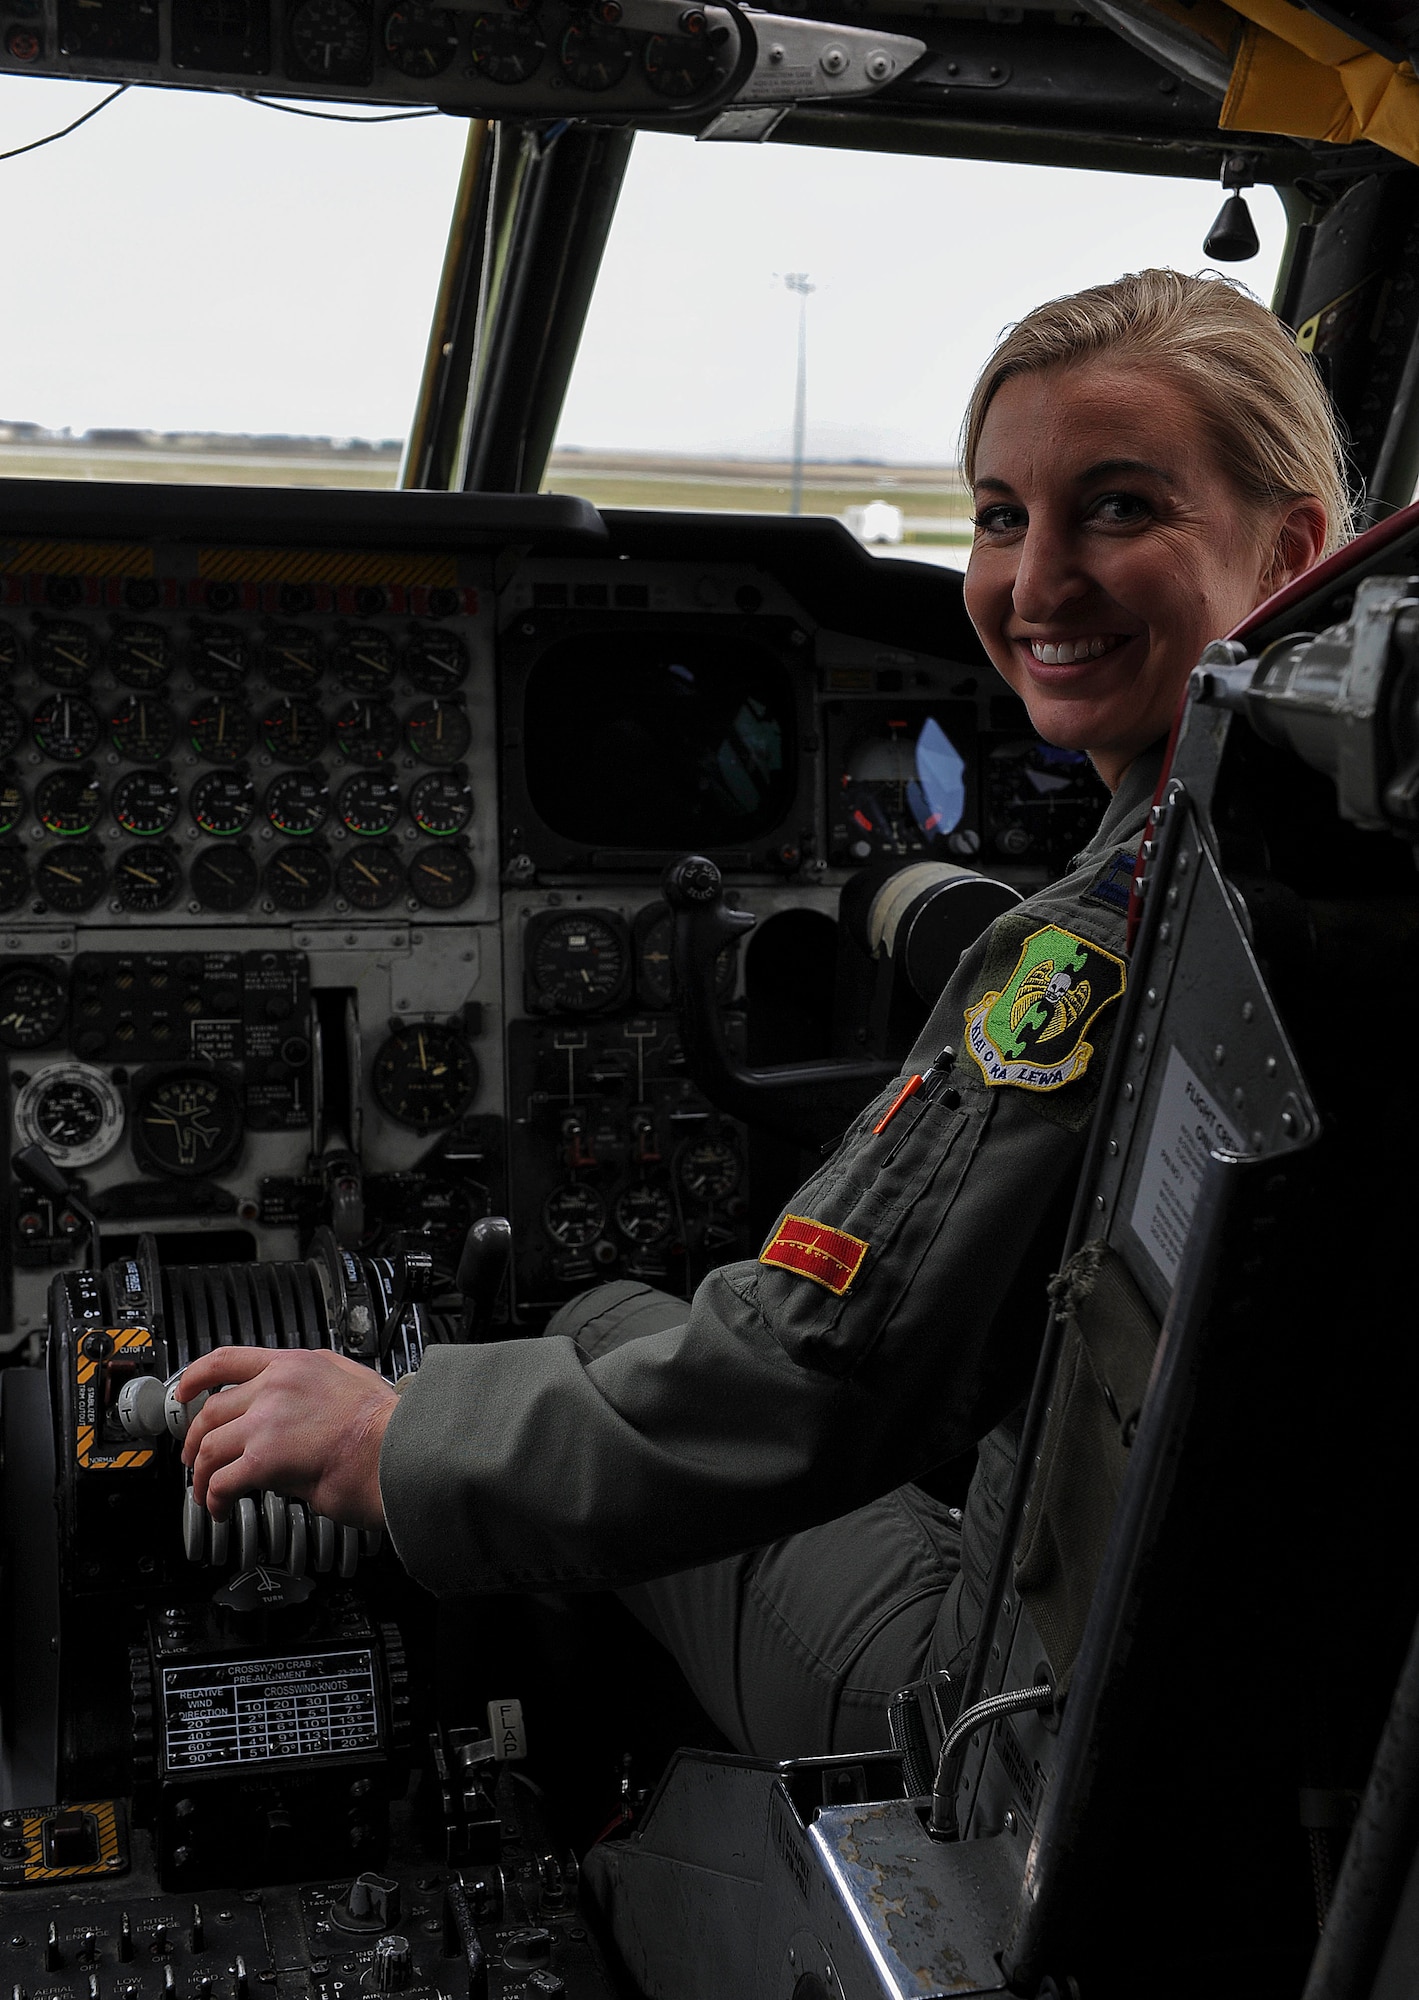 Capt. Kristin Nelson, 23rd Bomb Squadron pilot, prepares to take flight on Minot Air Force Base, N.D., April 30, 2015. It was Nelson’s first flight back since an accident that amputated her left hand. However, doctors were able to successfully re-attach it. (U.S. Air Force photo/Senior Airman Kristoffer Kaubisch)